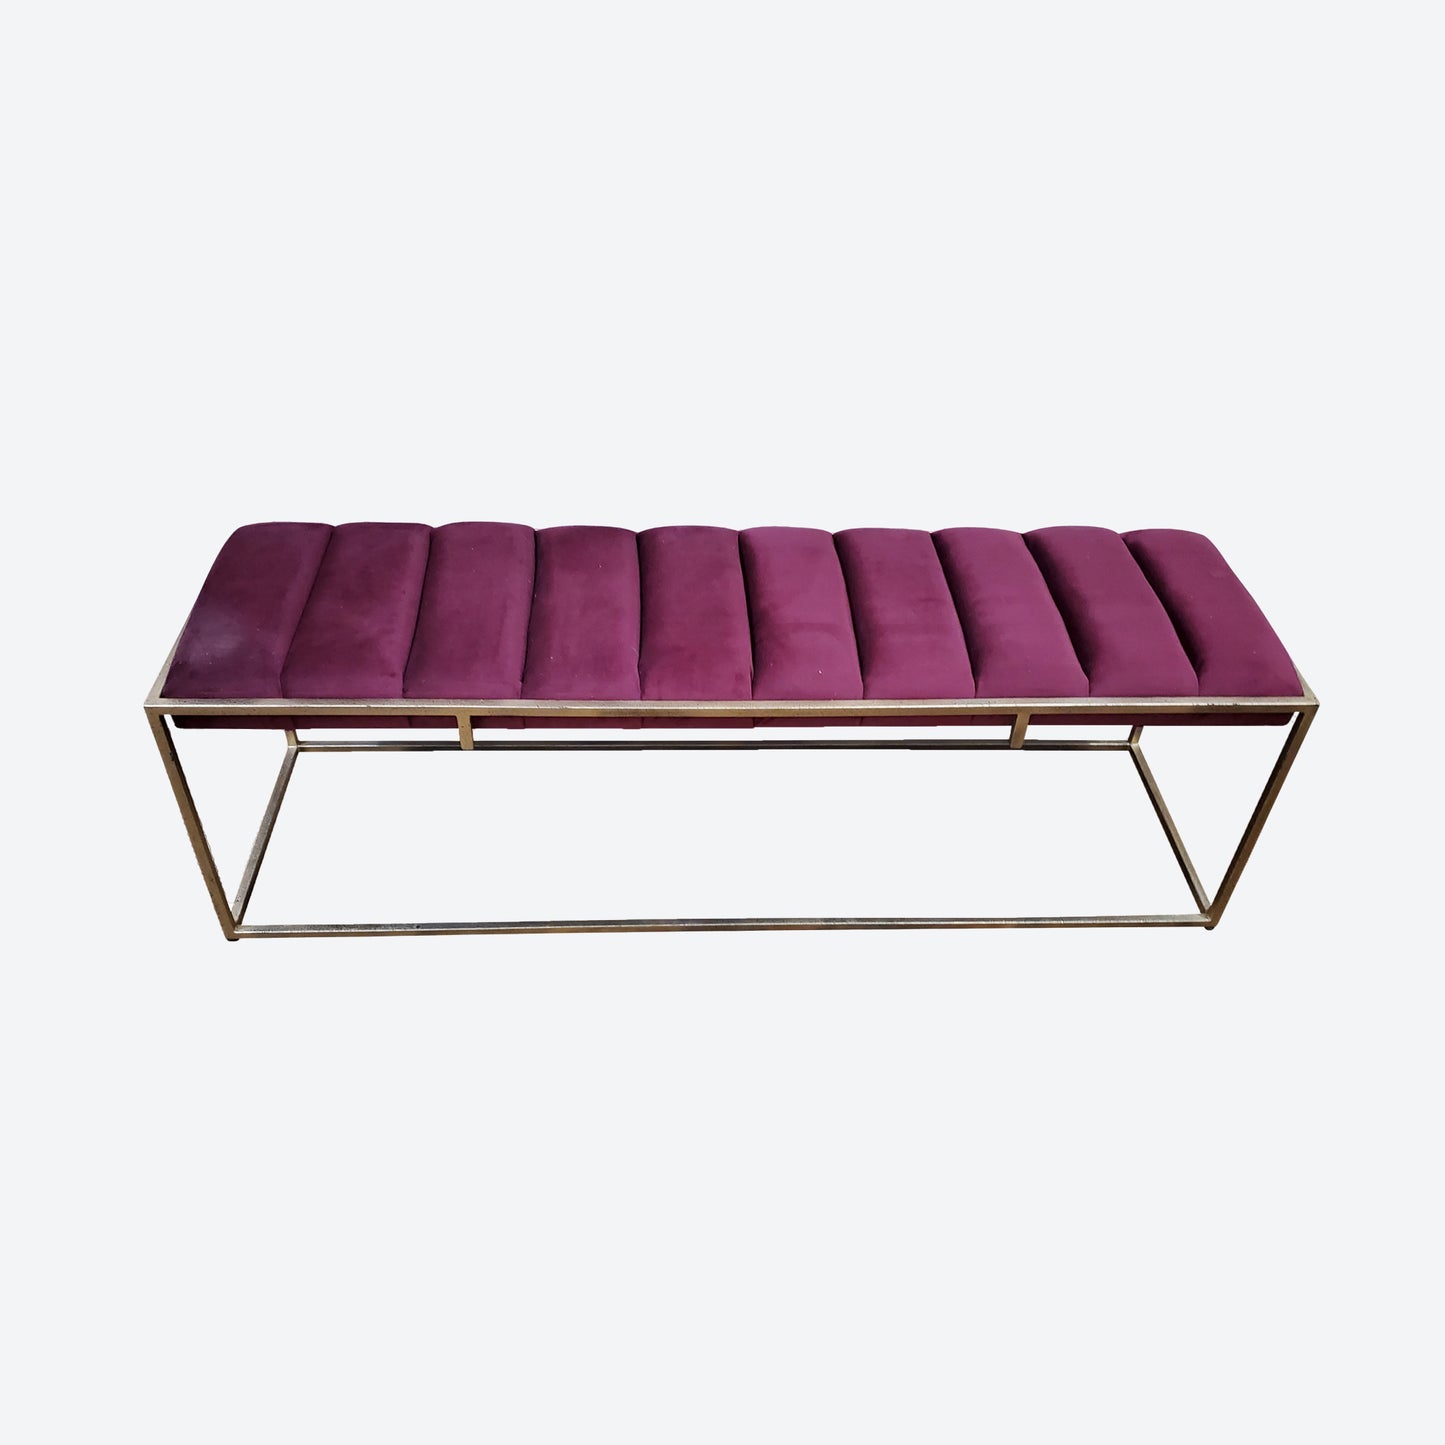 RED PANELED VELVET BENCH WITH METAL BASE AND LEGS - SK (SKU 1168)